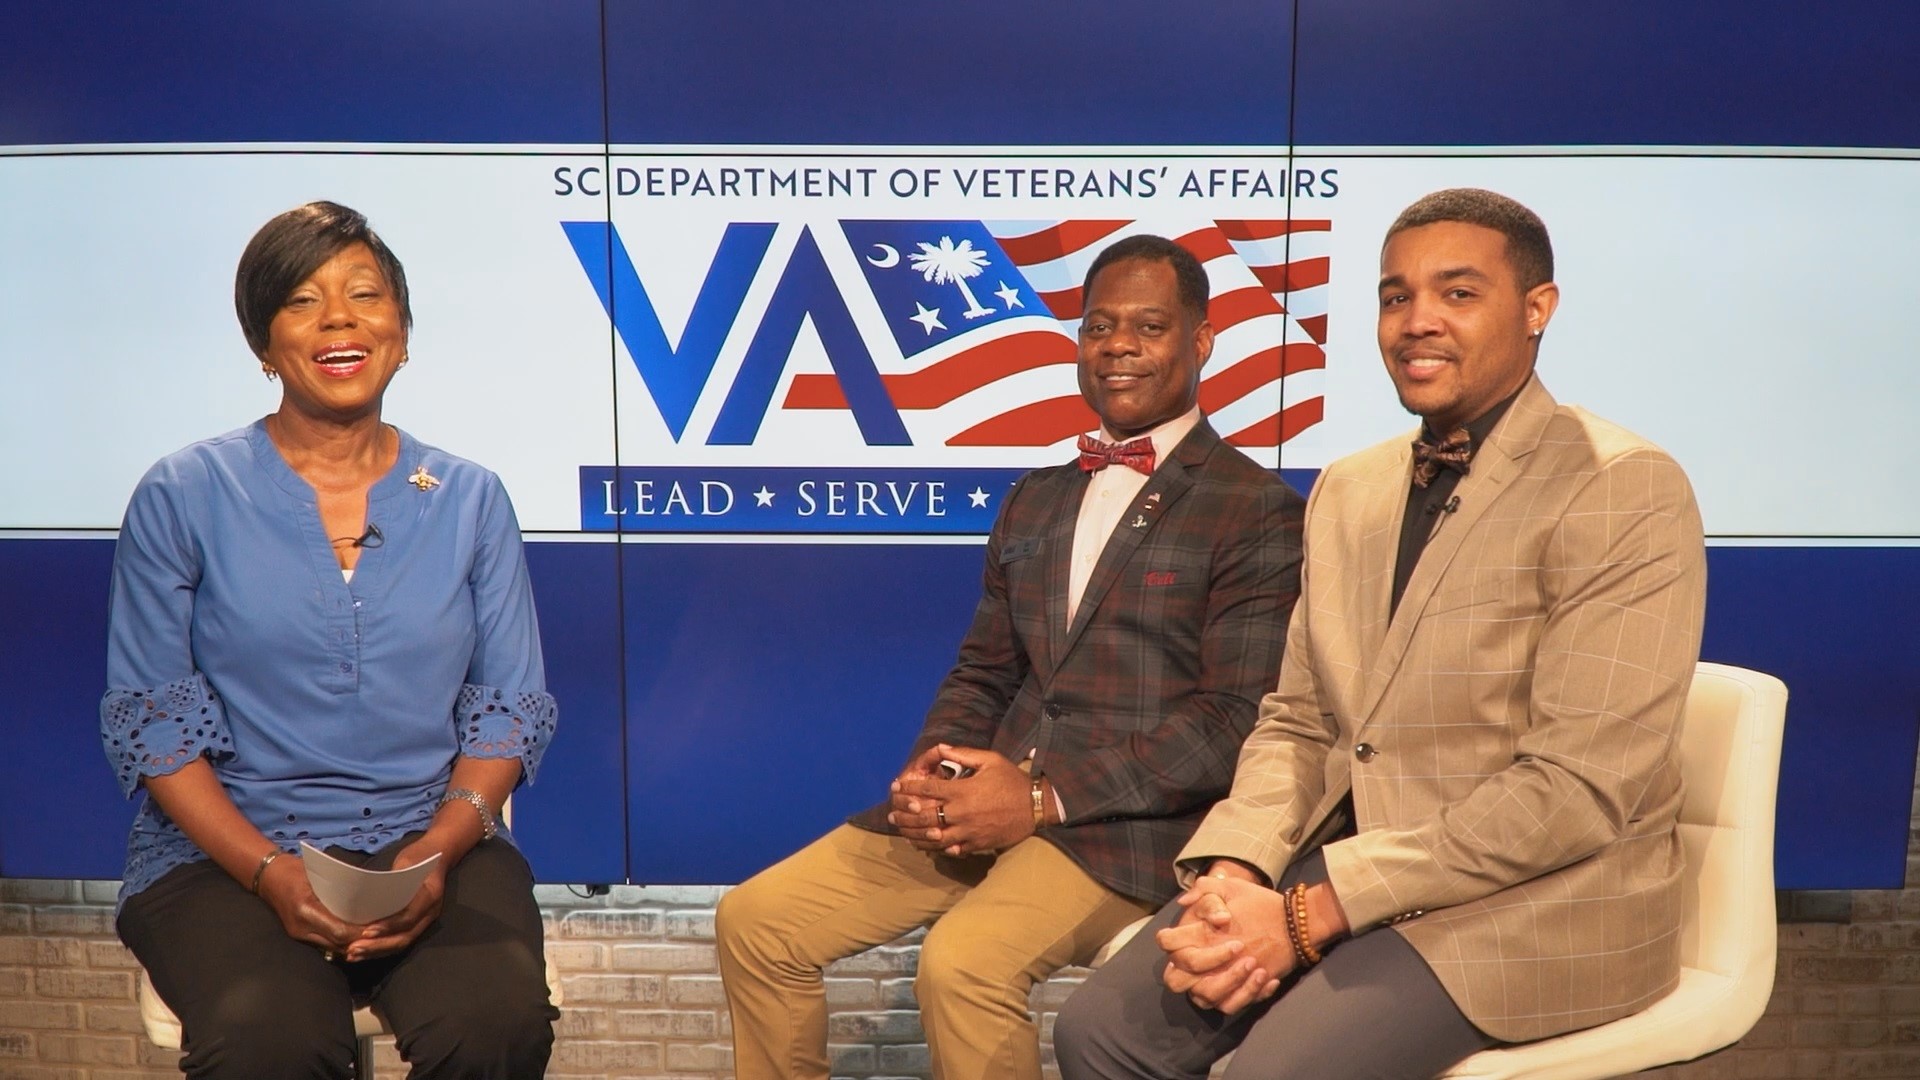 DO YOU KNOW a Veteran deserving of the honor “South Carolina’s Veteran of the Year?”